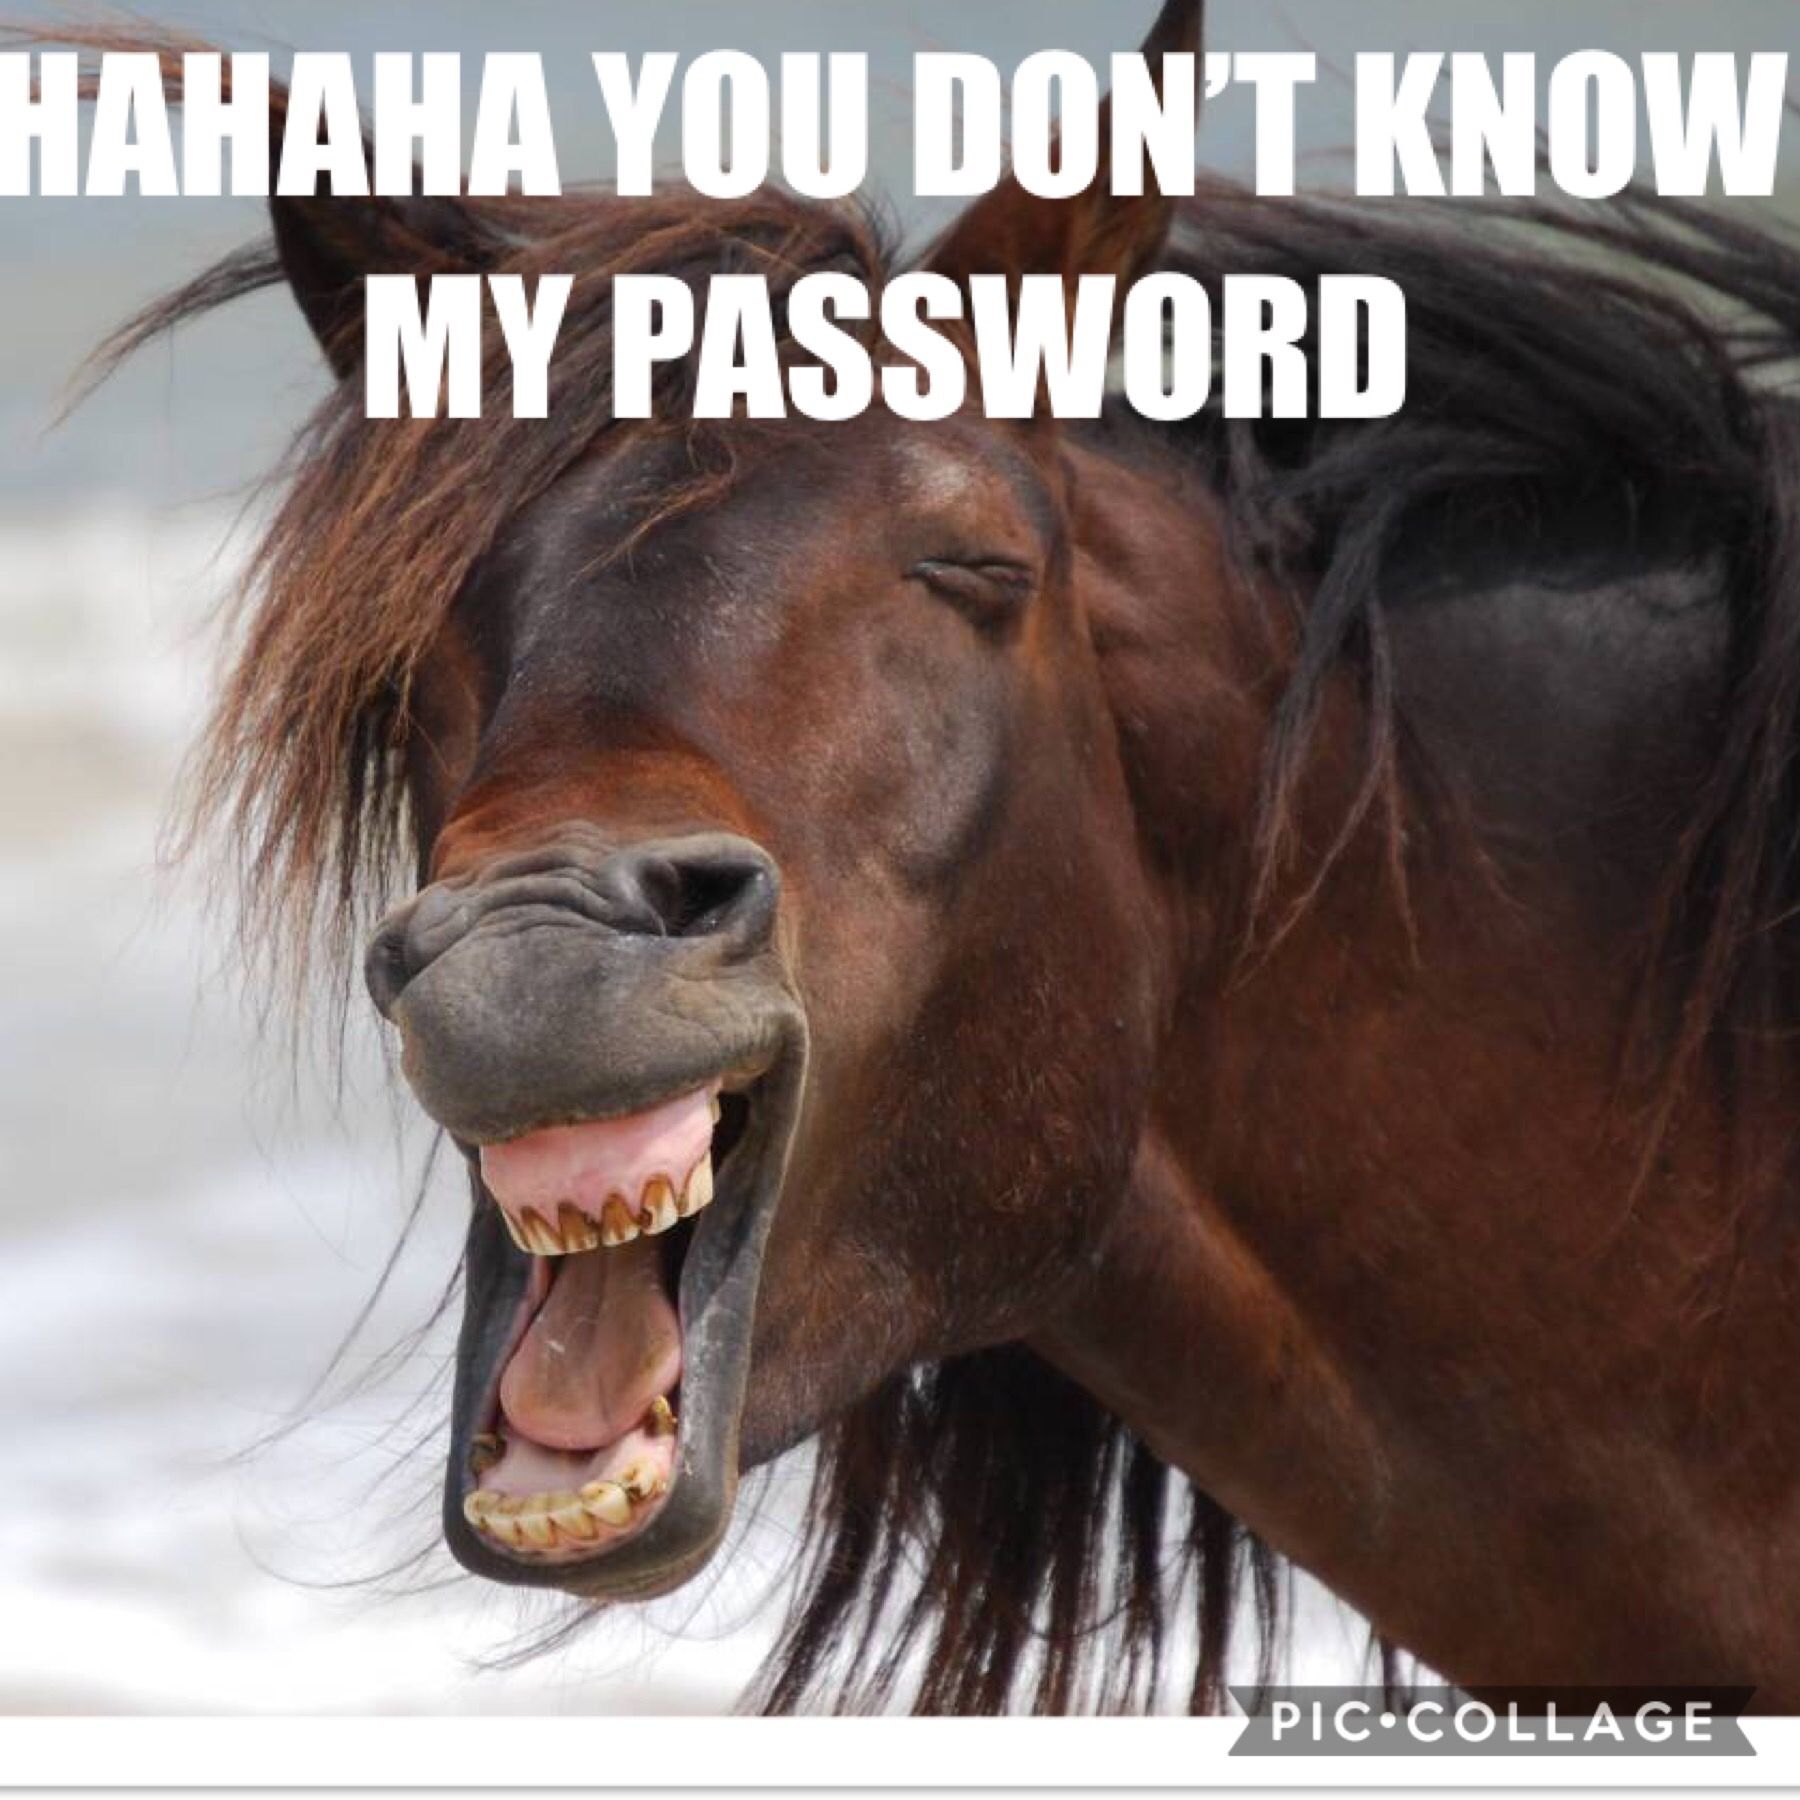 horsewallpaper you don't know my password horse wallpaper. Horse wallpaper, Funny phone wallpaper, Horses